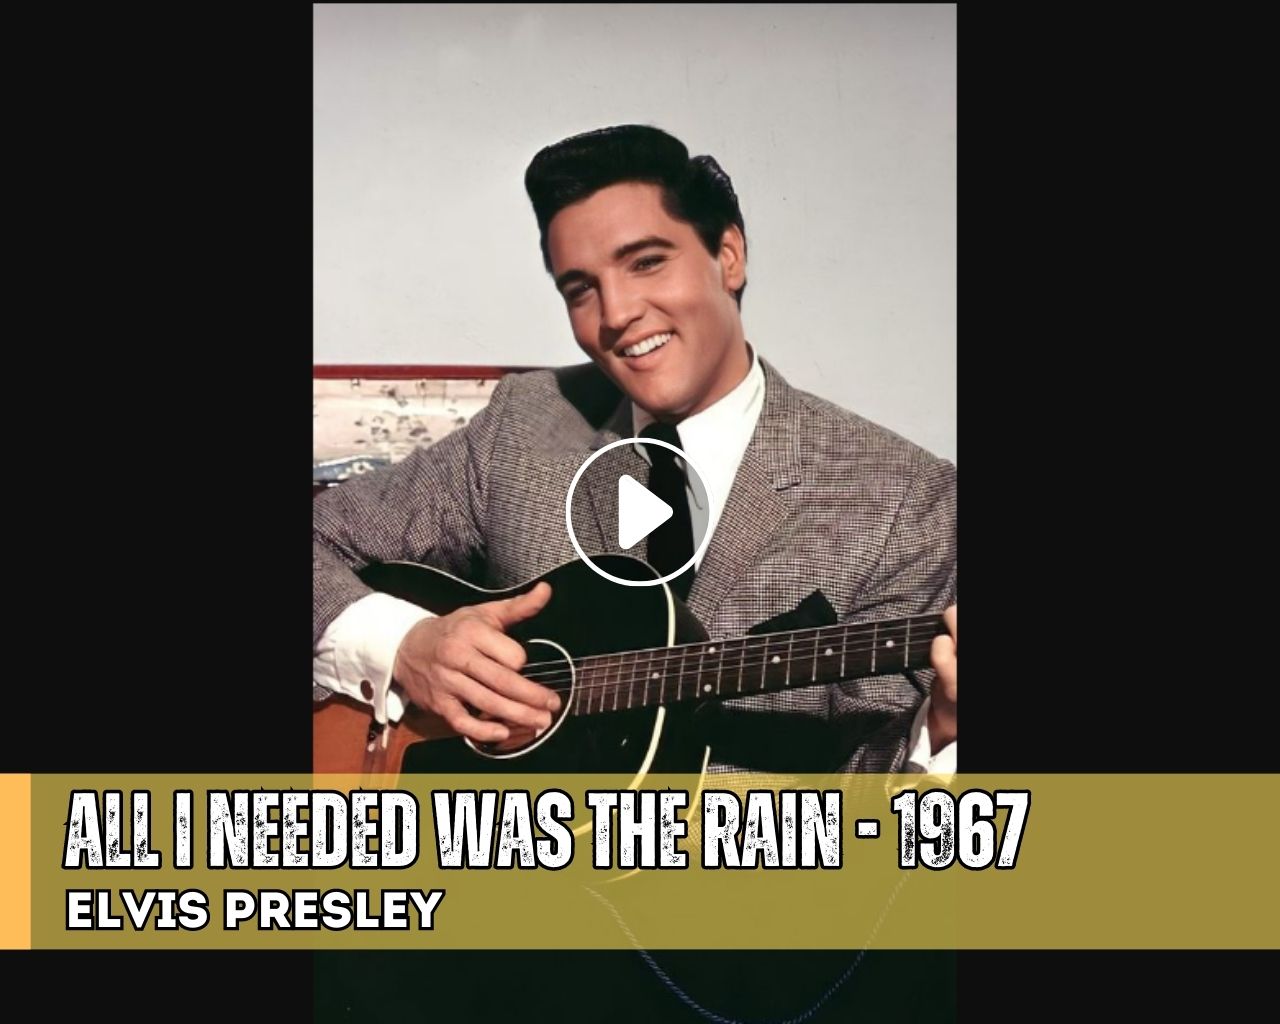 All I Needed Was the Rain - Elvis Presley - 1967